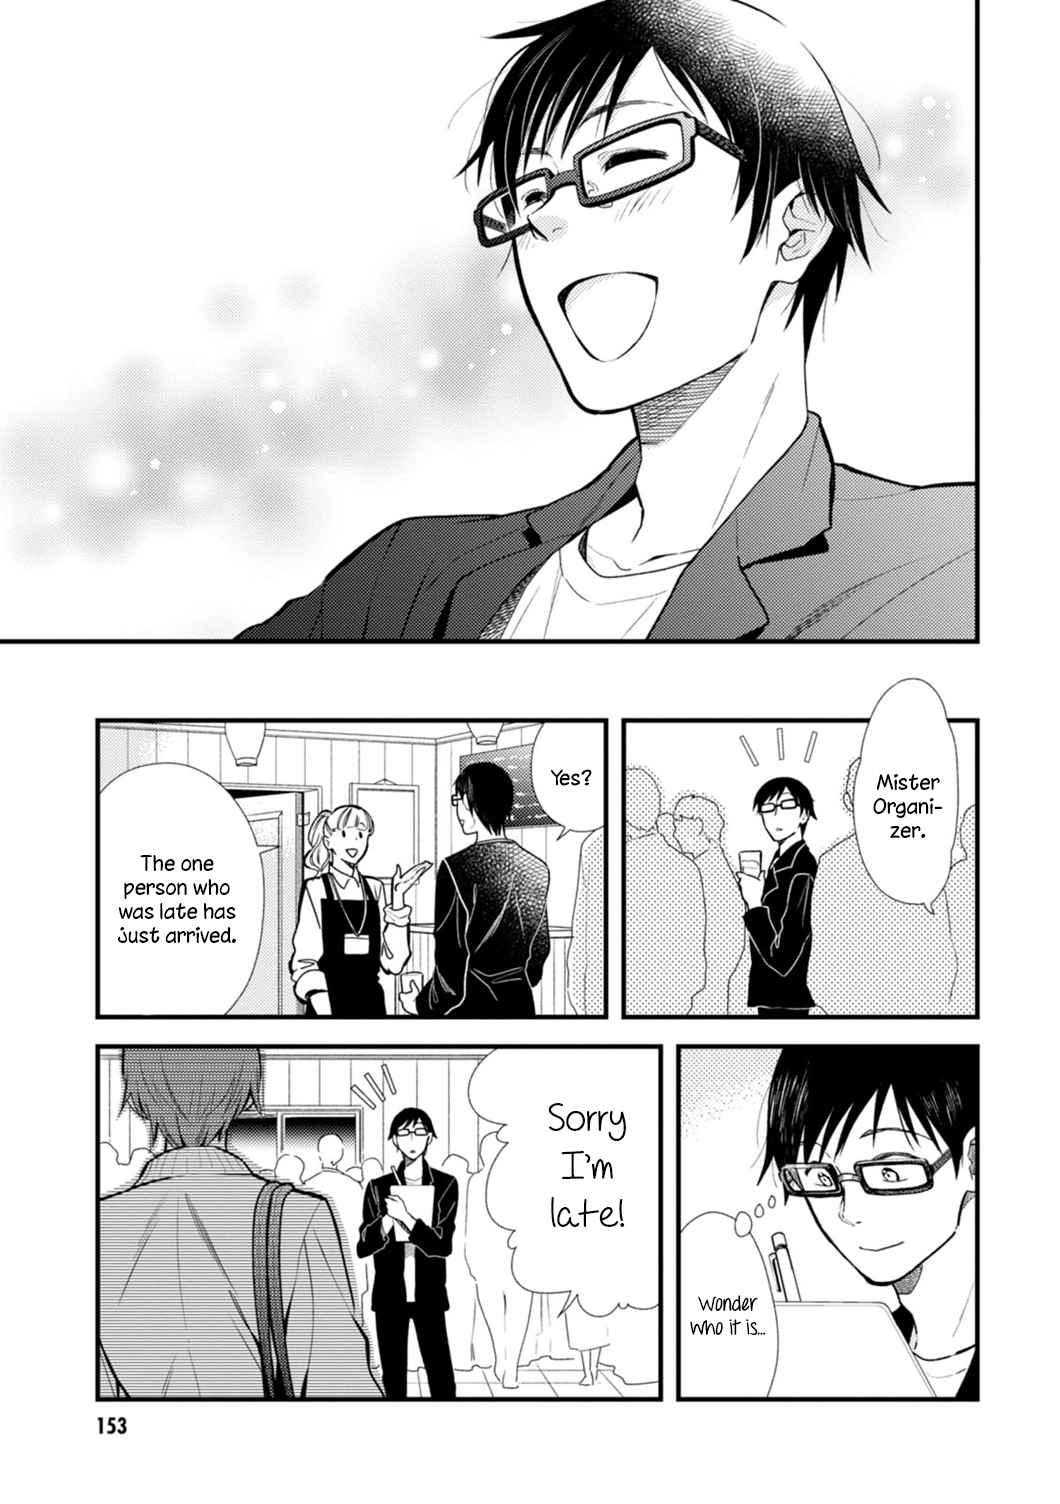 If You're Gonna Dress Up, Do It Like This Vol. 1 Ch. 8